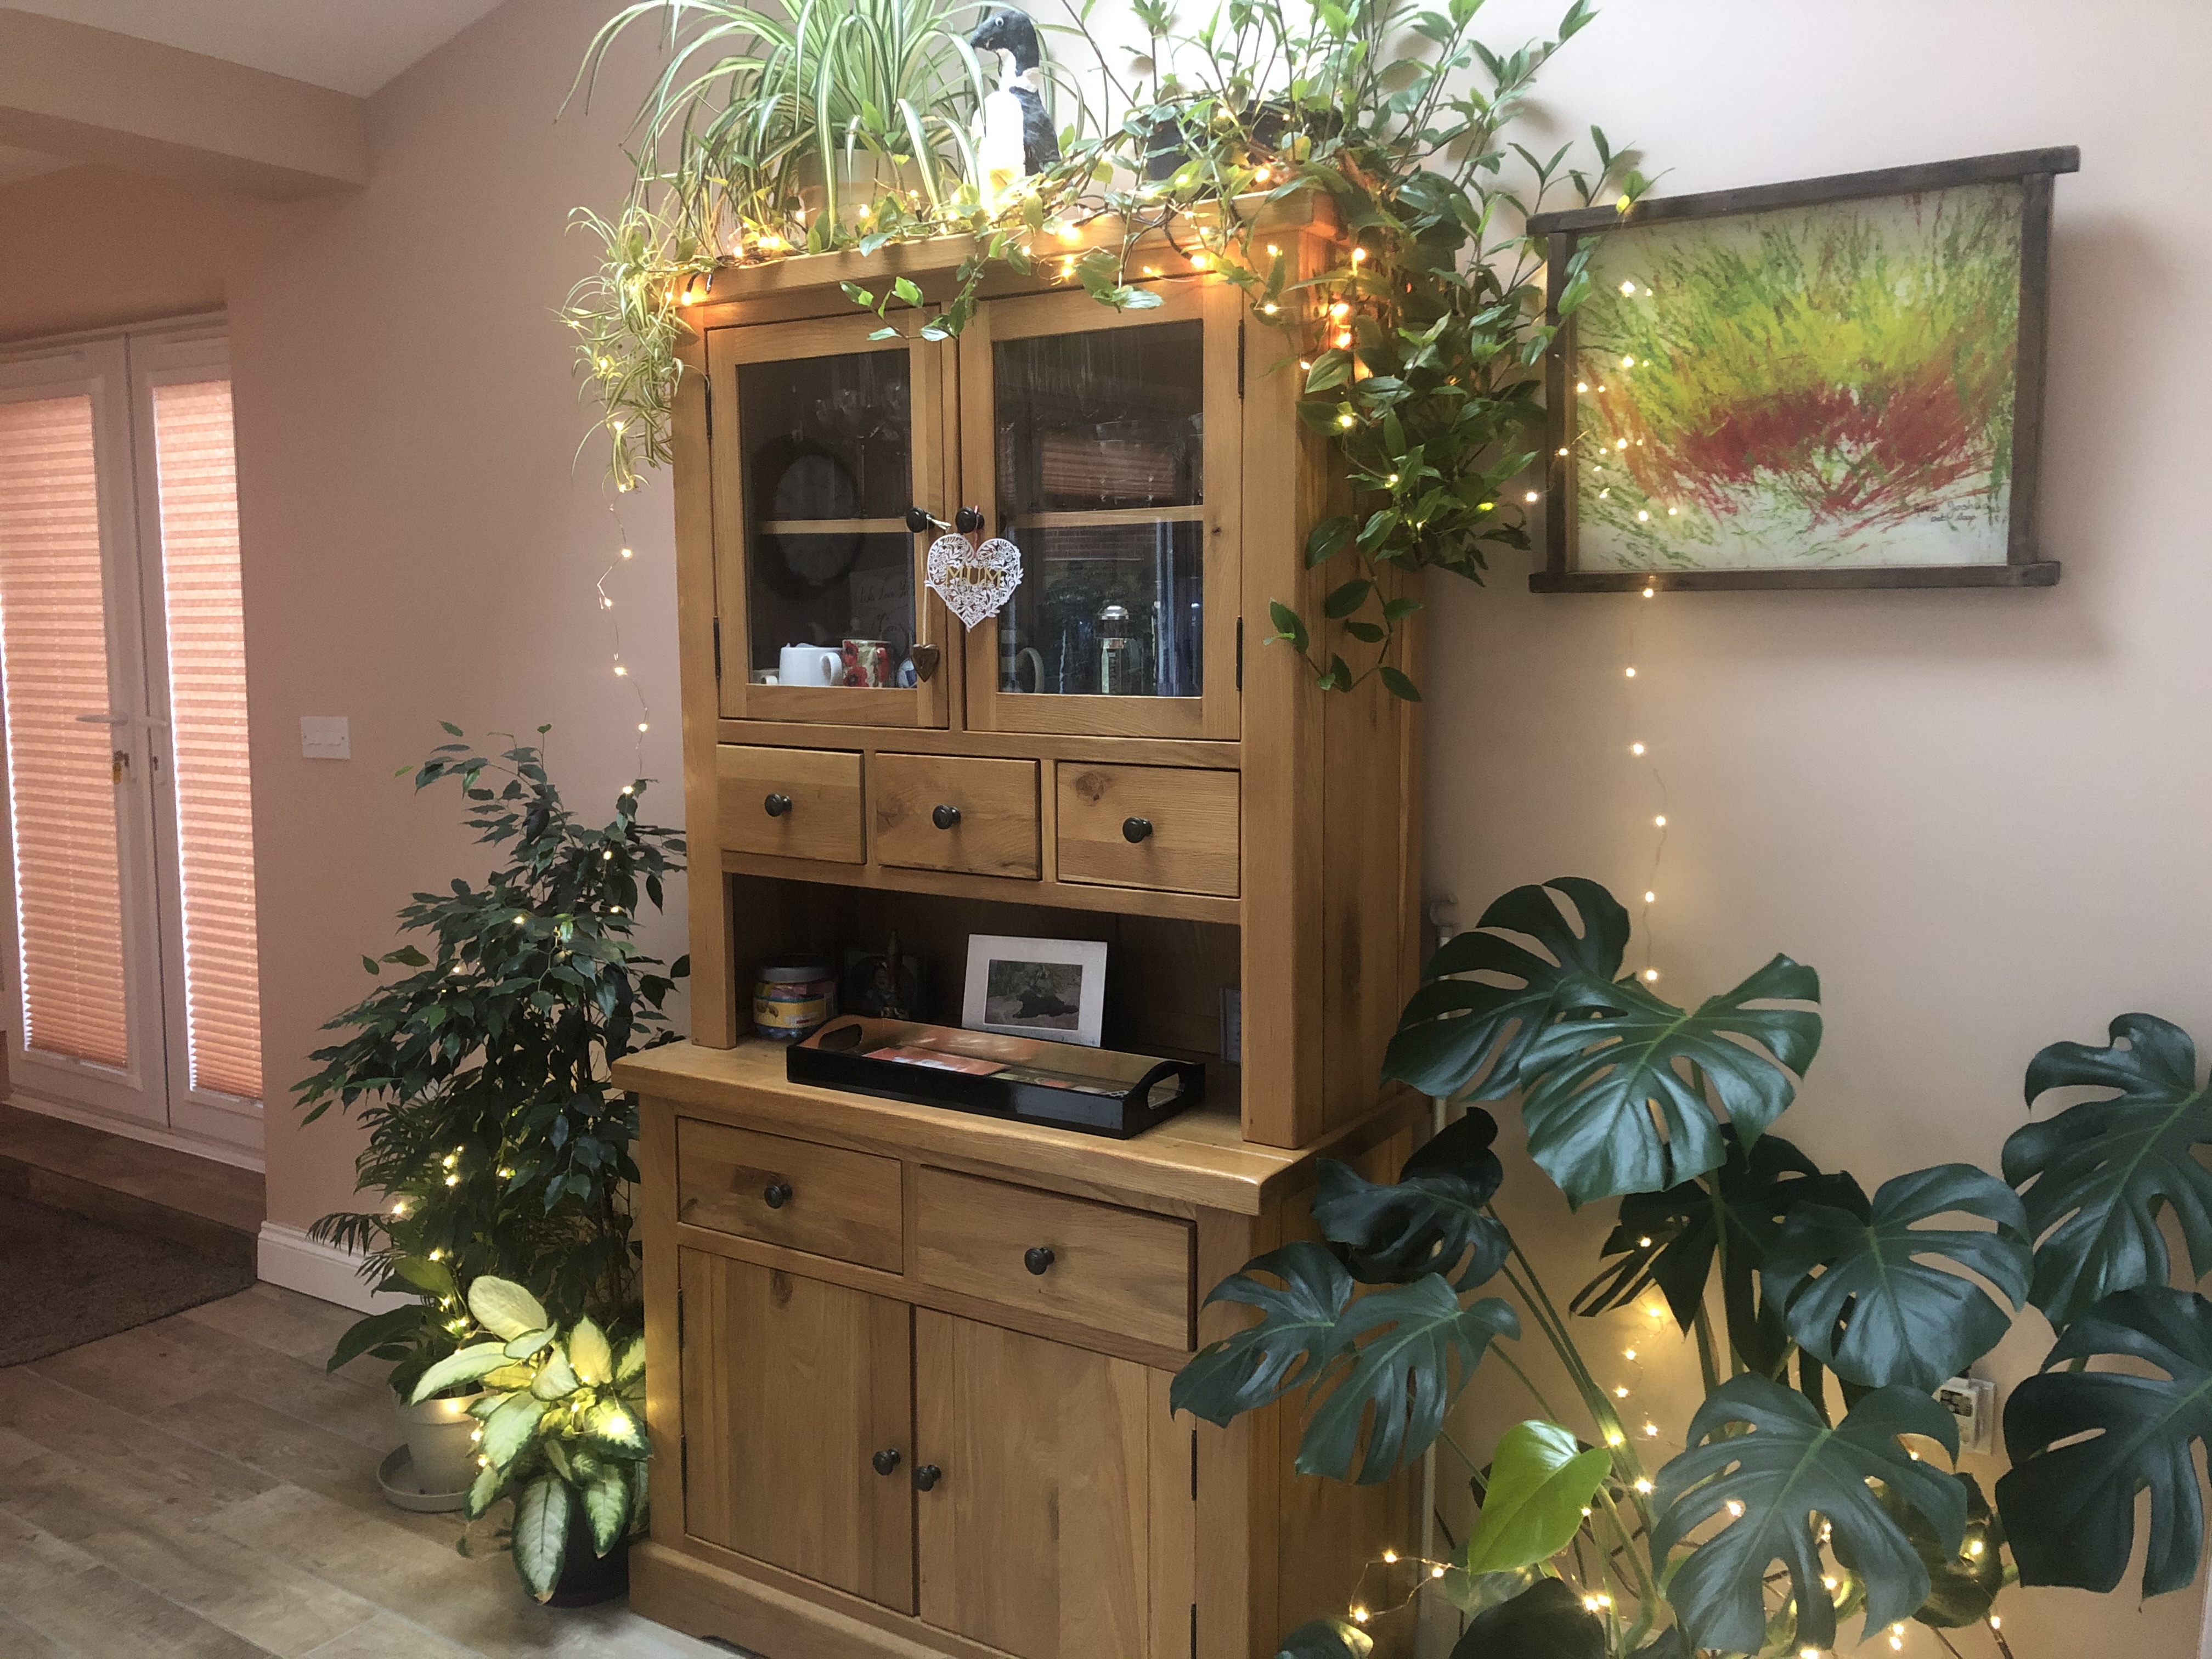 Oak cupboard covered in plants, trailing from above and large potted plants to each side.